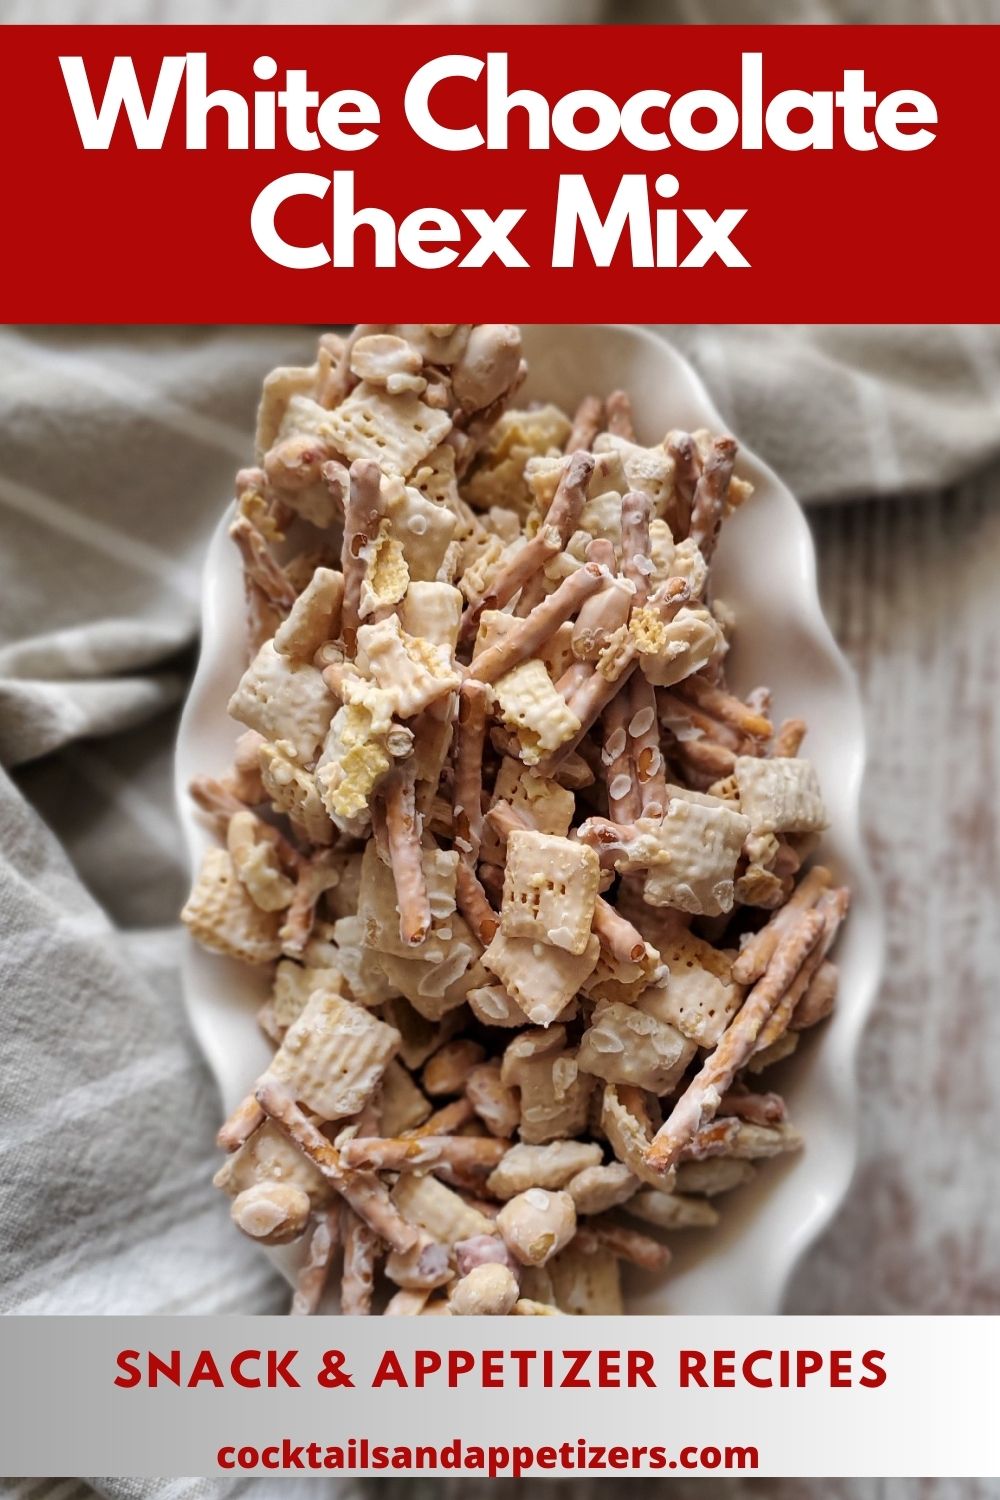 White Chocolate Chex Mix in a white serving bowl with a cloth alongside.